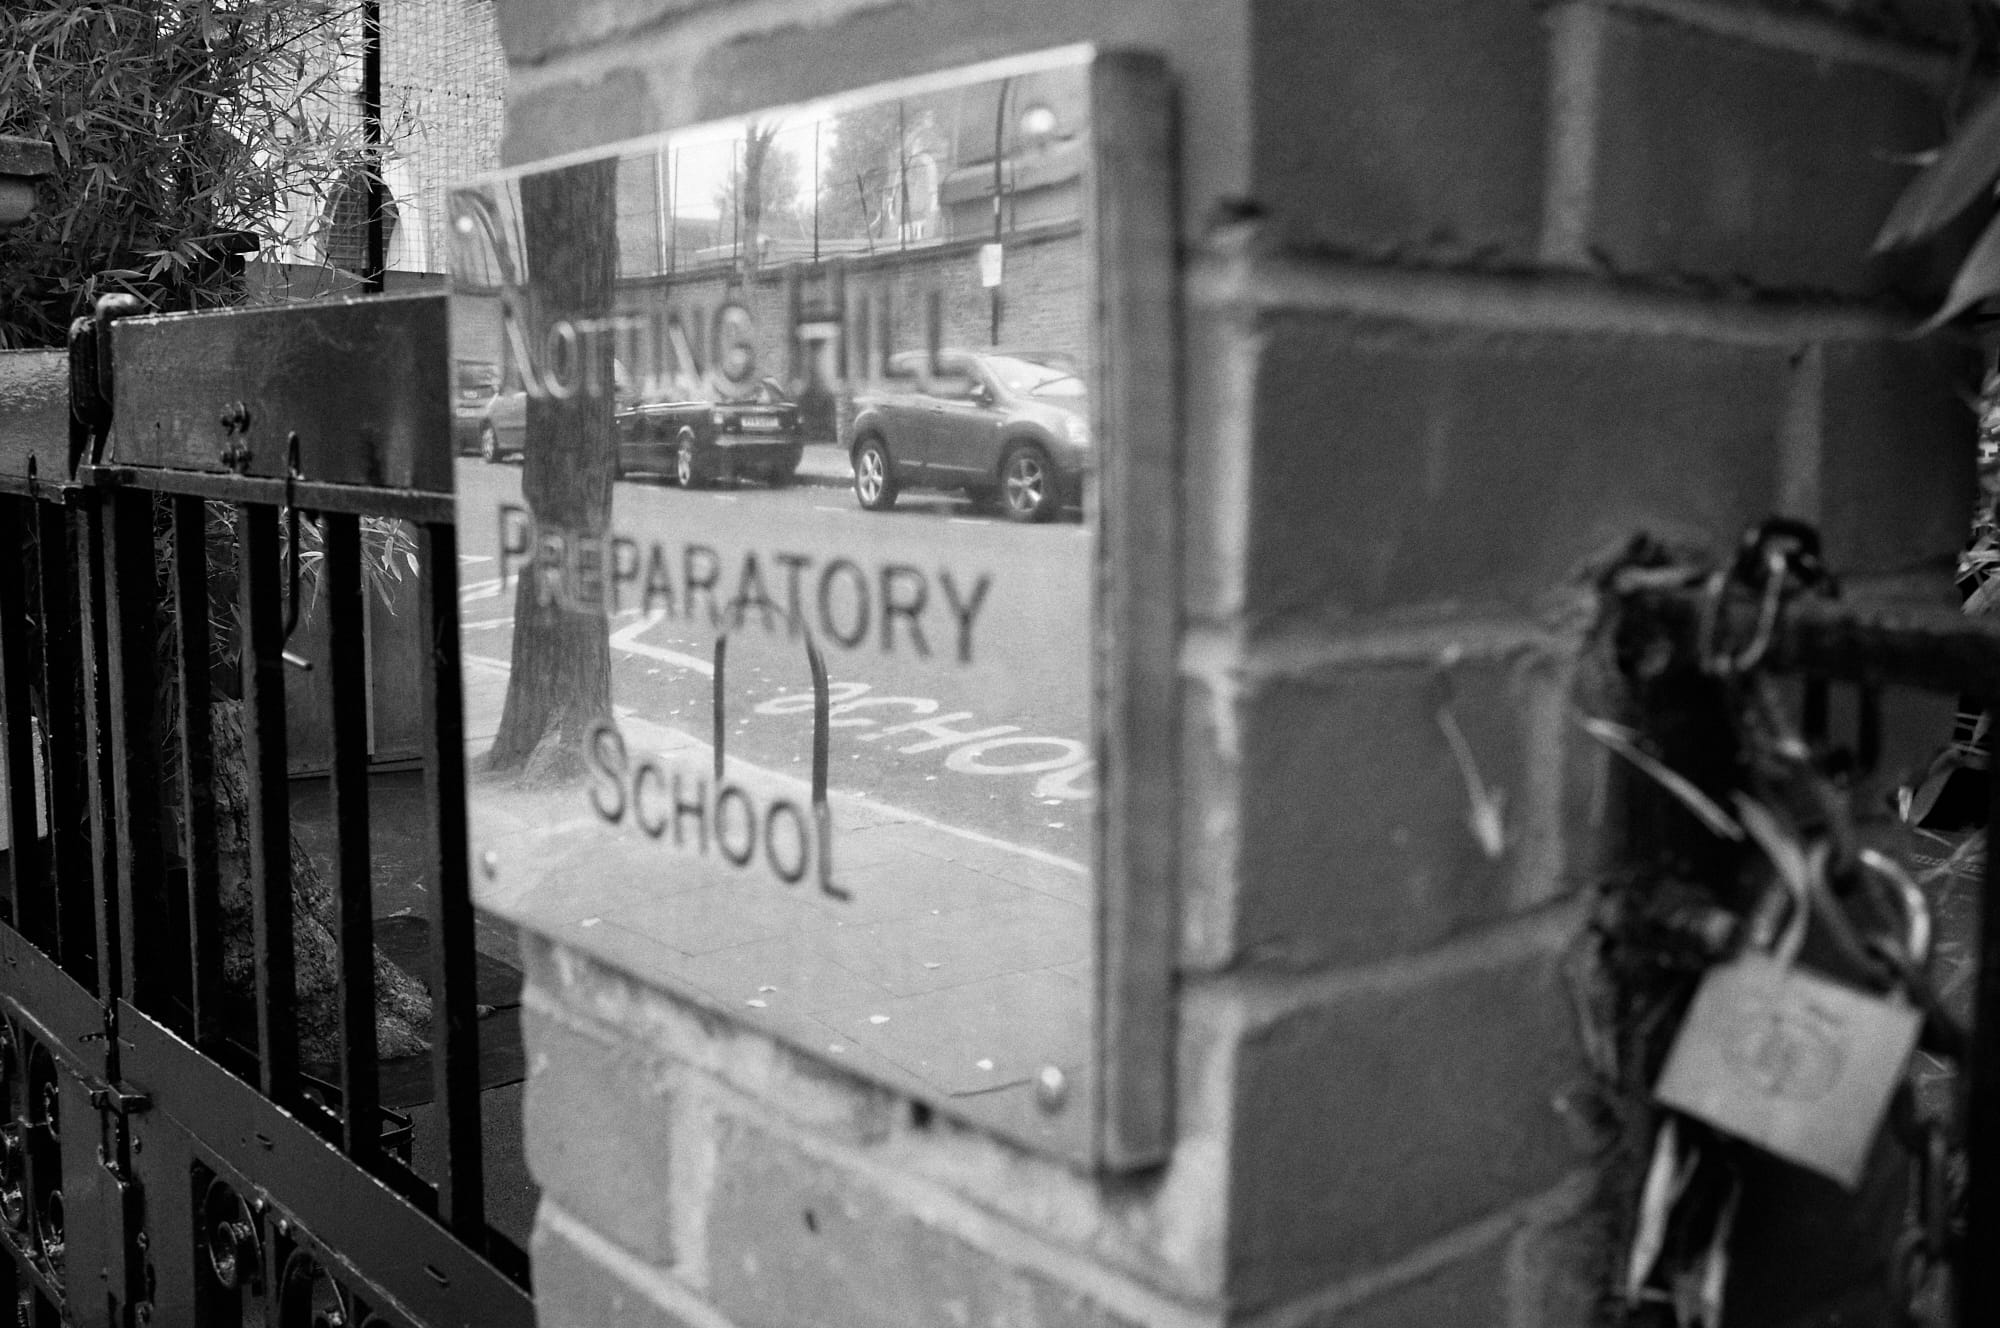 reflection in gate sign for Notting Hill Preparatory School